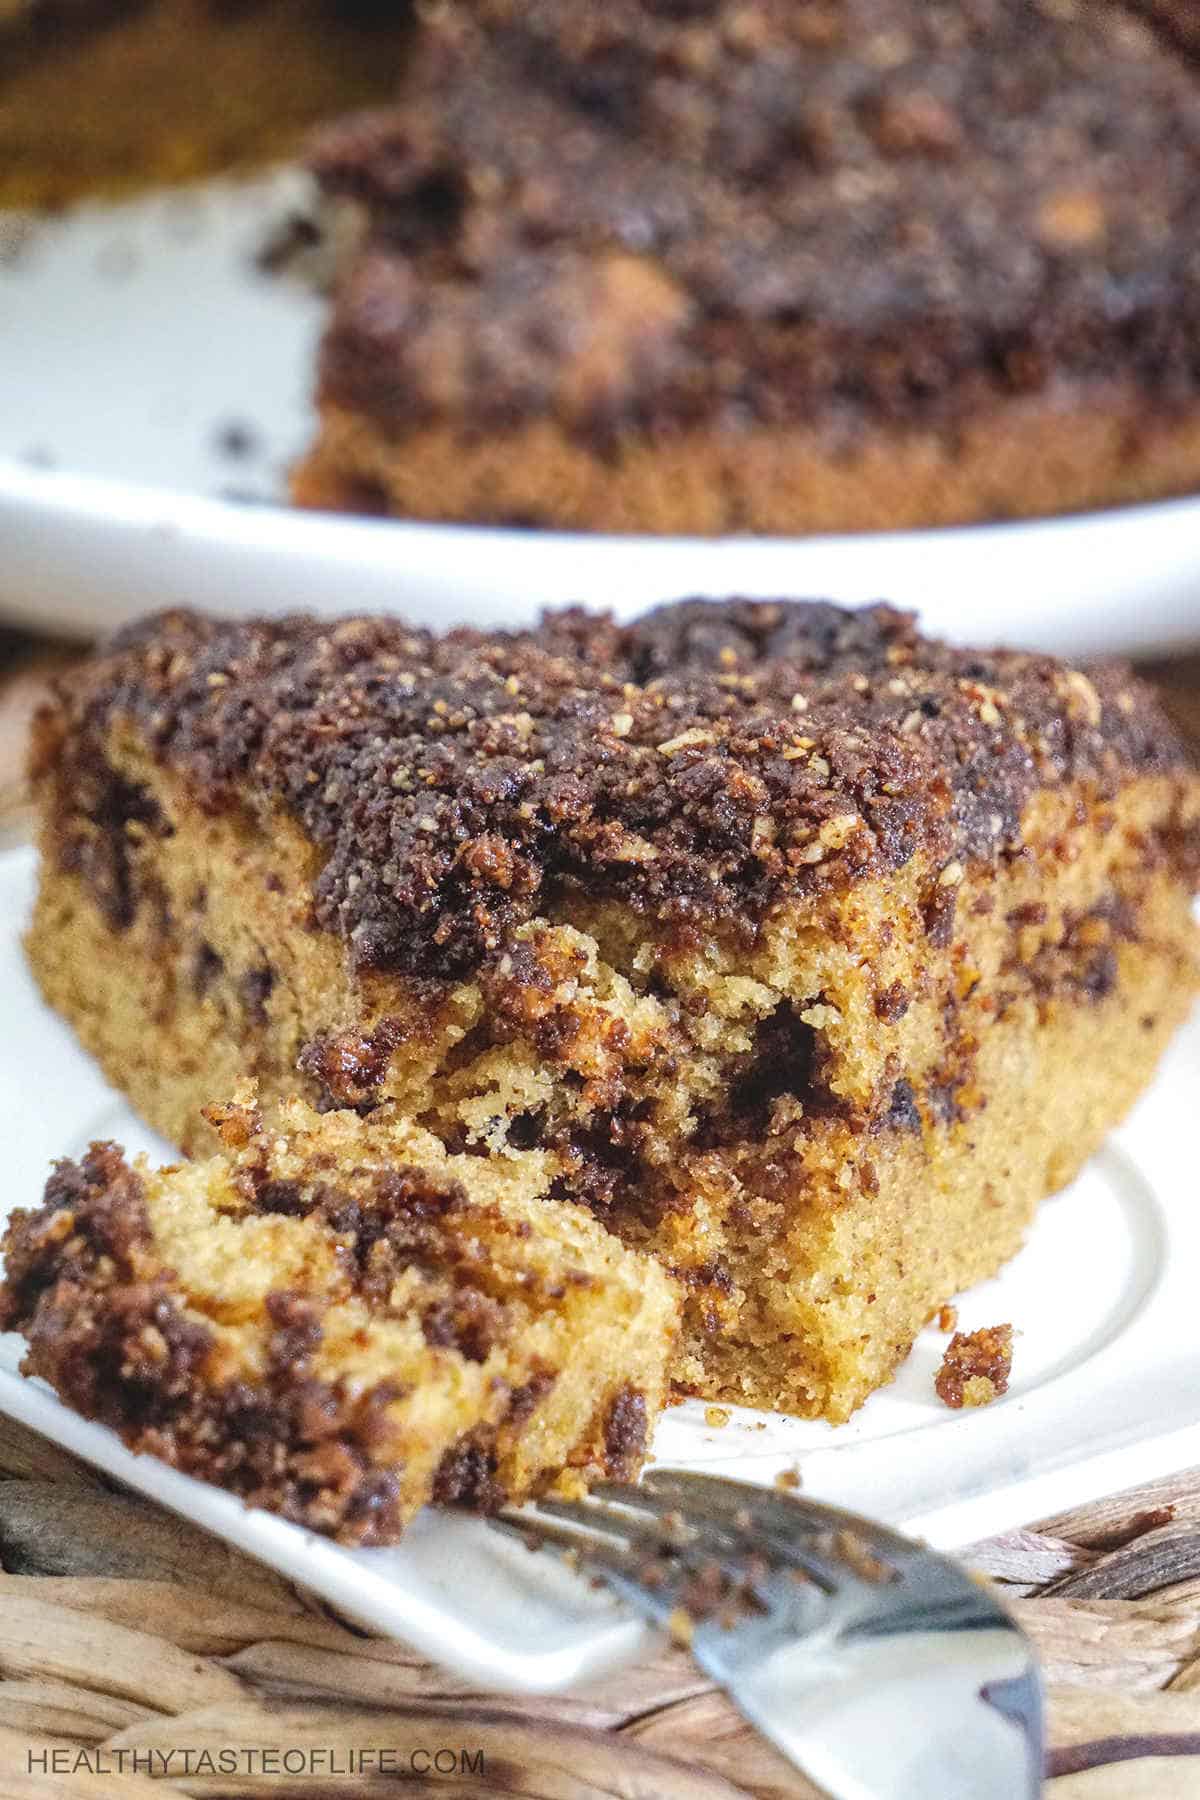 Looking for a gluten free coffee cake recipe? Check out this gluten free coffee and walnut cake with a buttery cinnamon crumb. Moist soft and it melts in your mouth, sweet enough to satisfy your craving. This gluten free coffee cake can be enjoyed as a dessert or as breakfast with a cup of coffee or tea. #moist #coffeecake #glutenfree #walnutcake #cinnamon